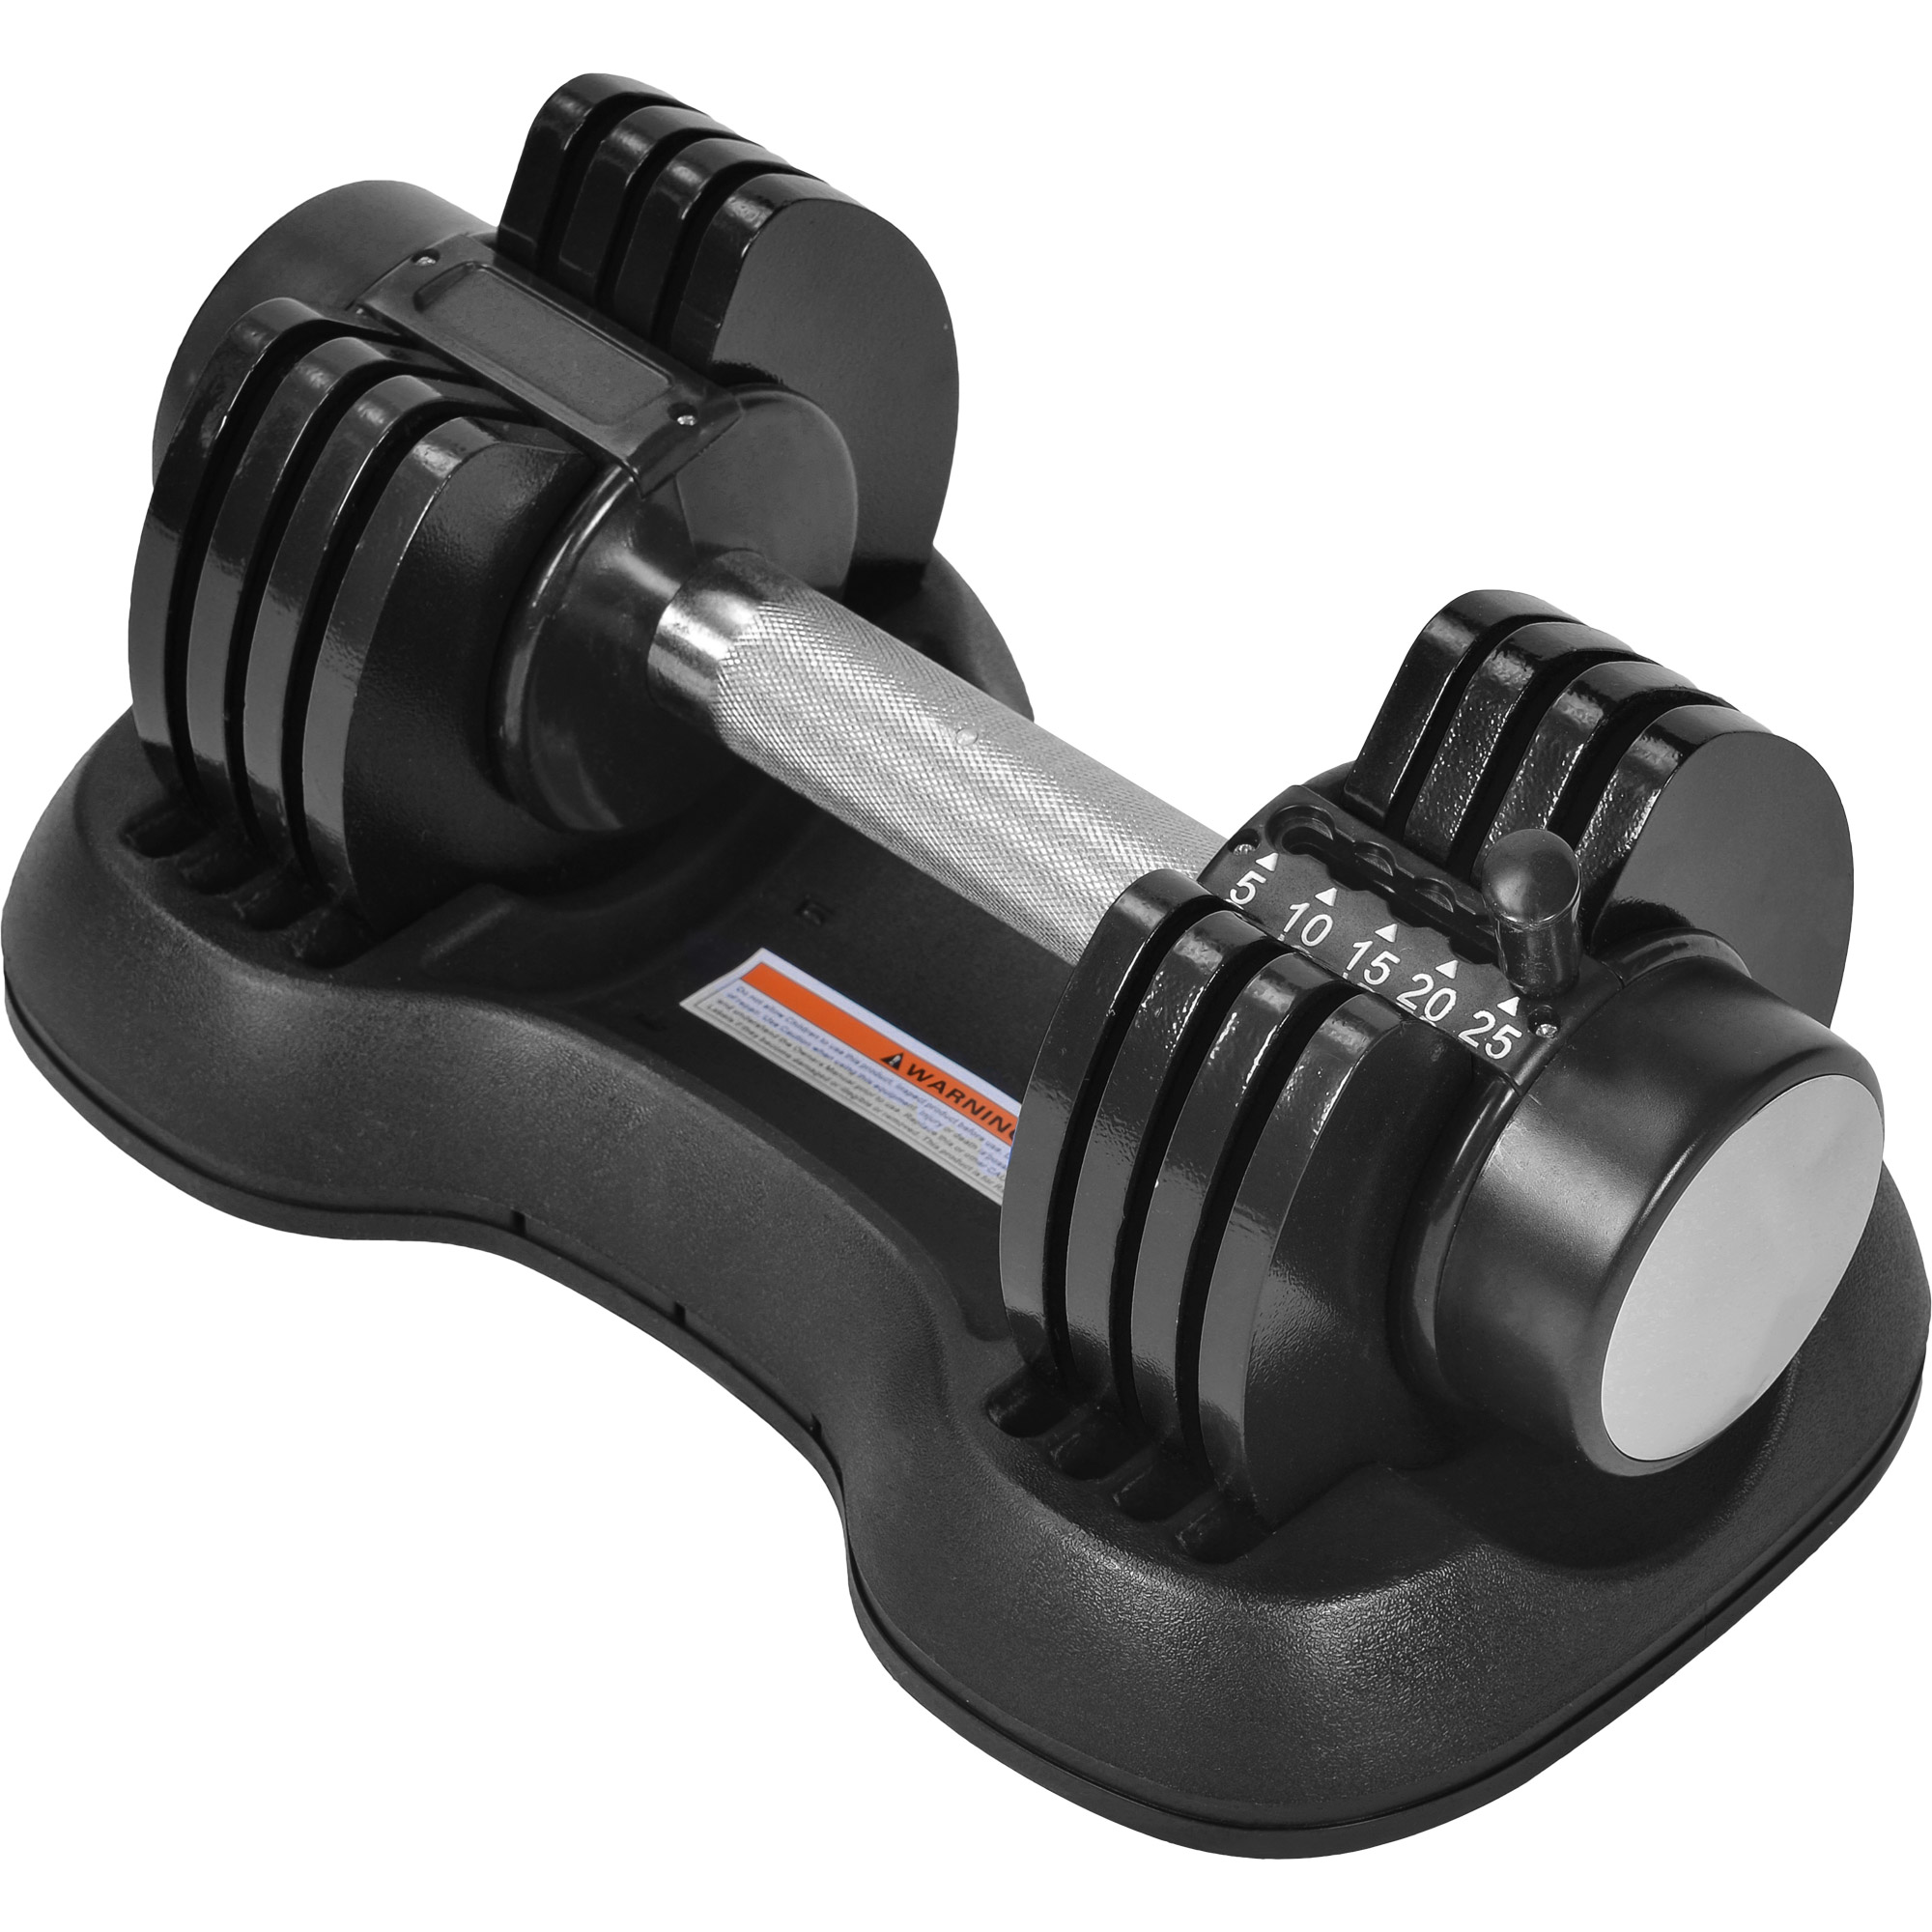 Adjustable Dumbbell 25 lbs with Fast Automatic Adjustable and Weight Plate for Body Workout Home Gym, black, Note: Single-Boyel Living